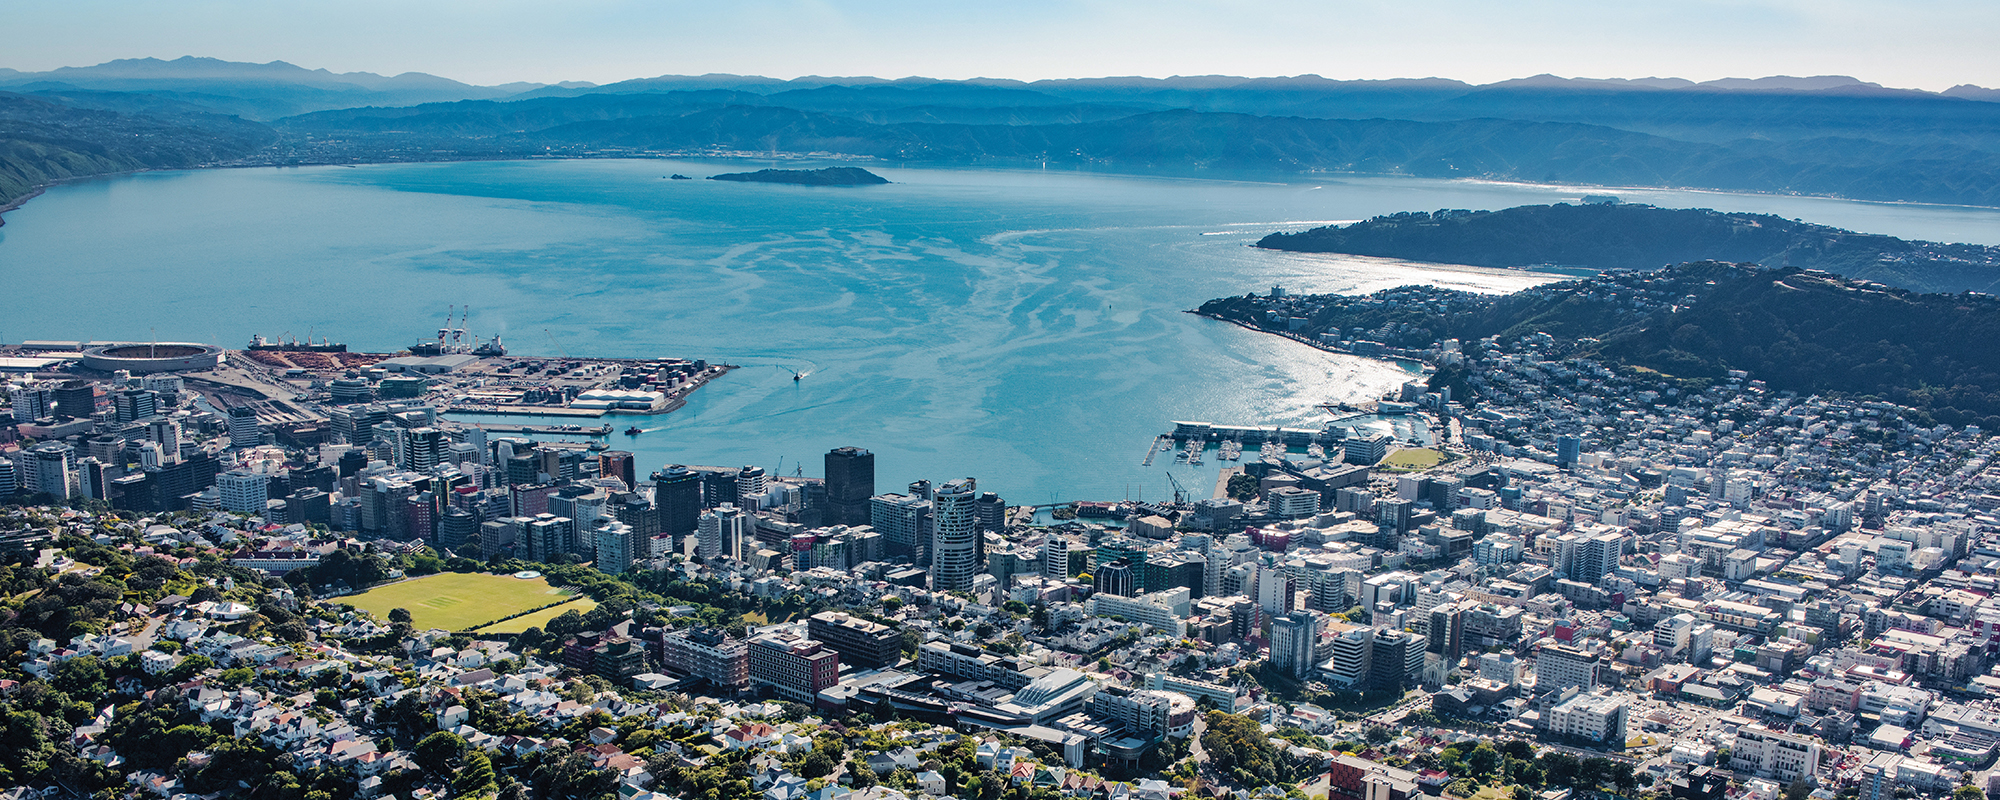 Wellington harbour from the air.